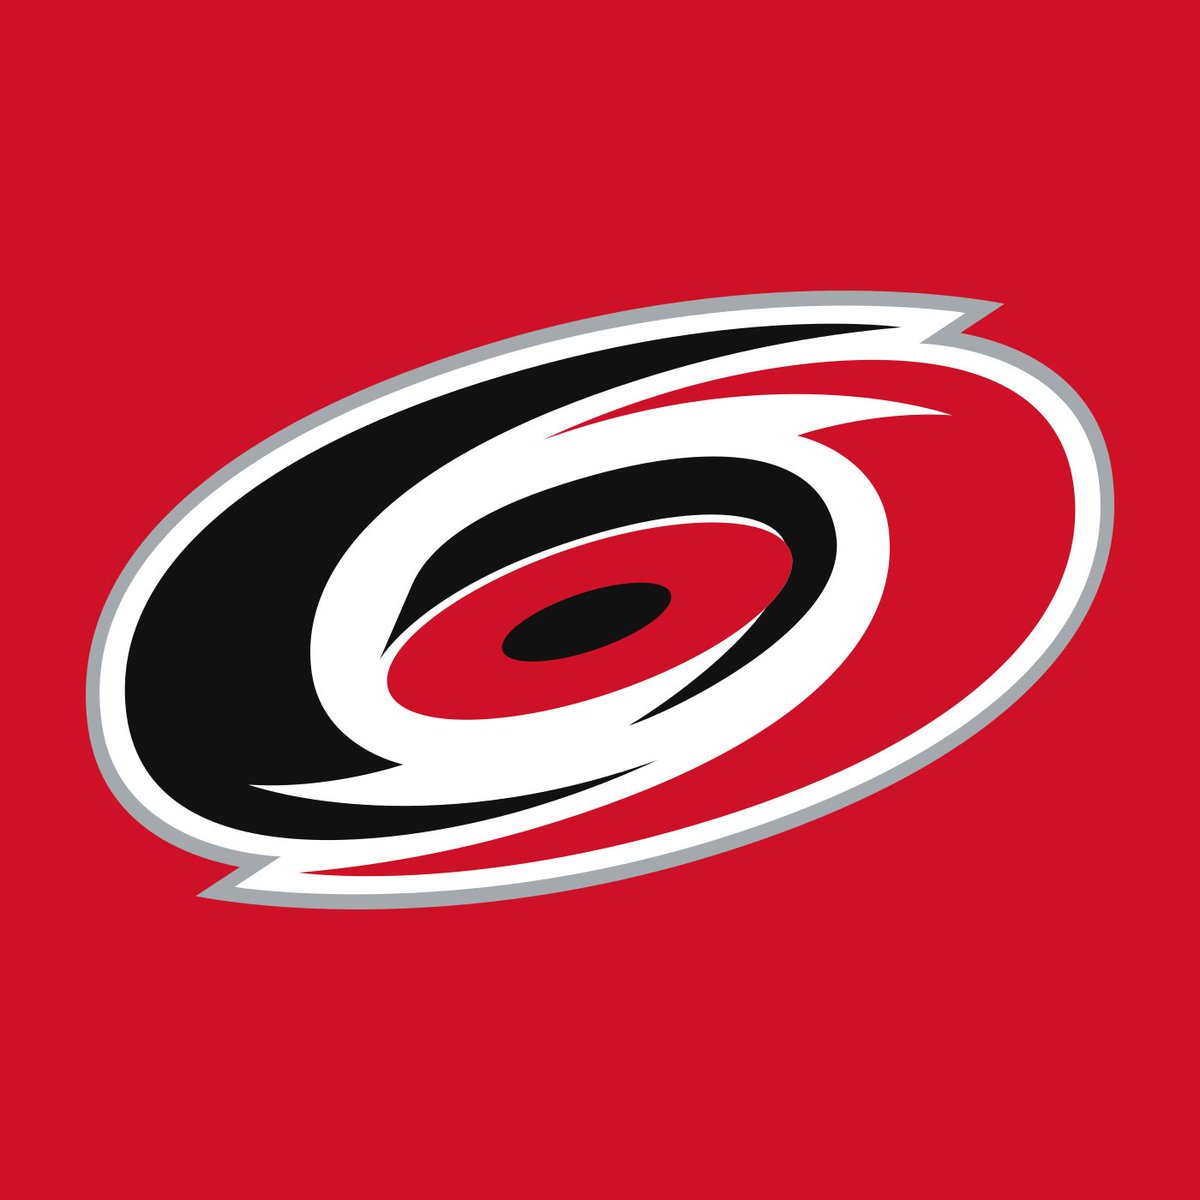 With the 101st overall selection in the NHL Draft, the Carolina Hurricanes are proud to select: Blue. https://t.co/w9MSRtYnro